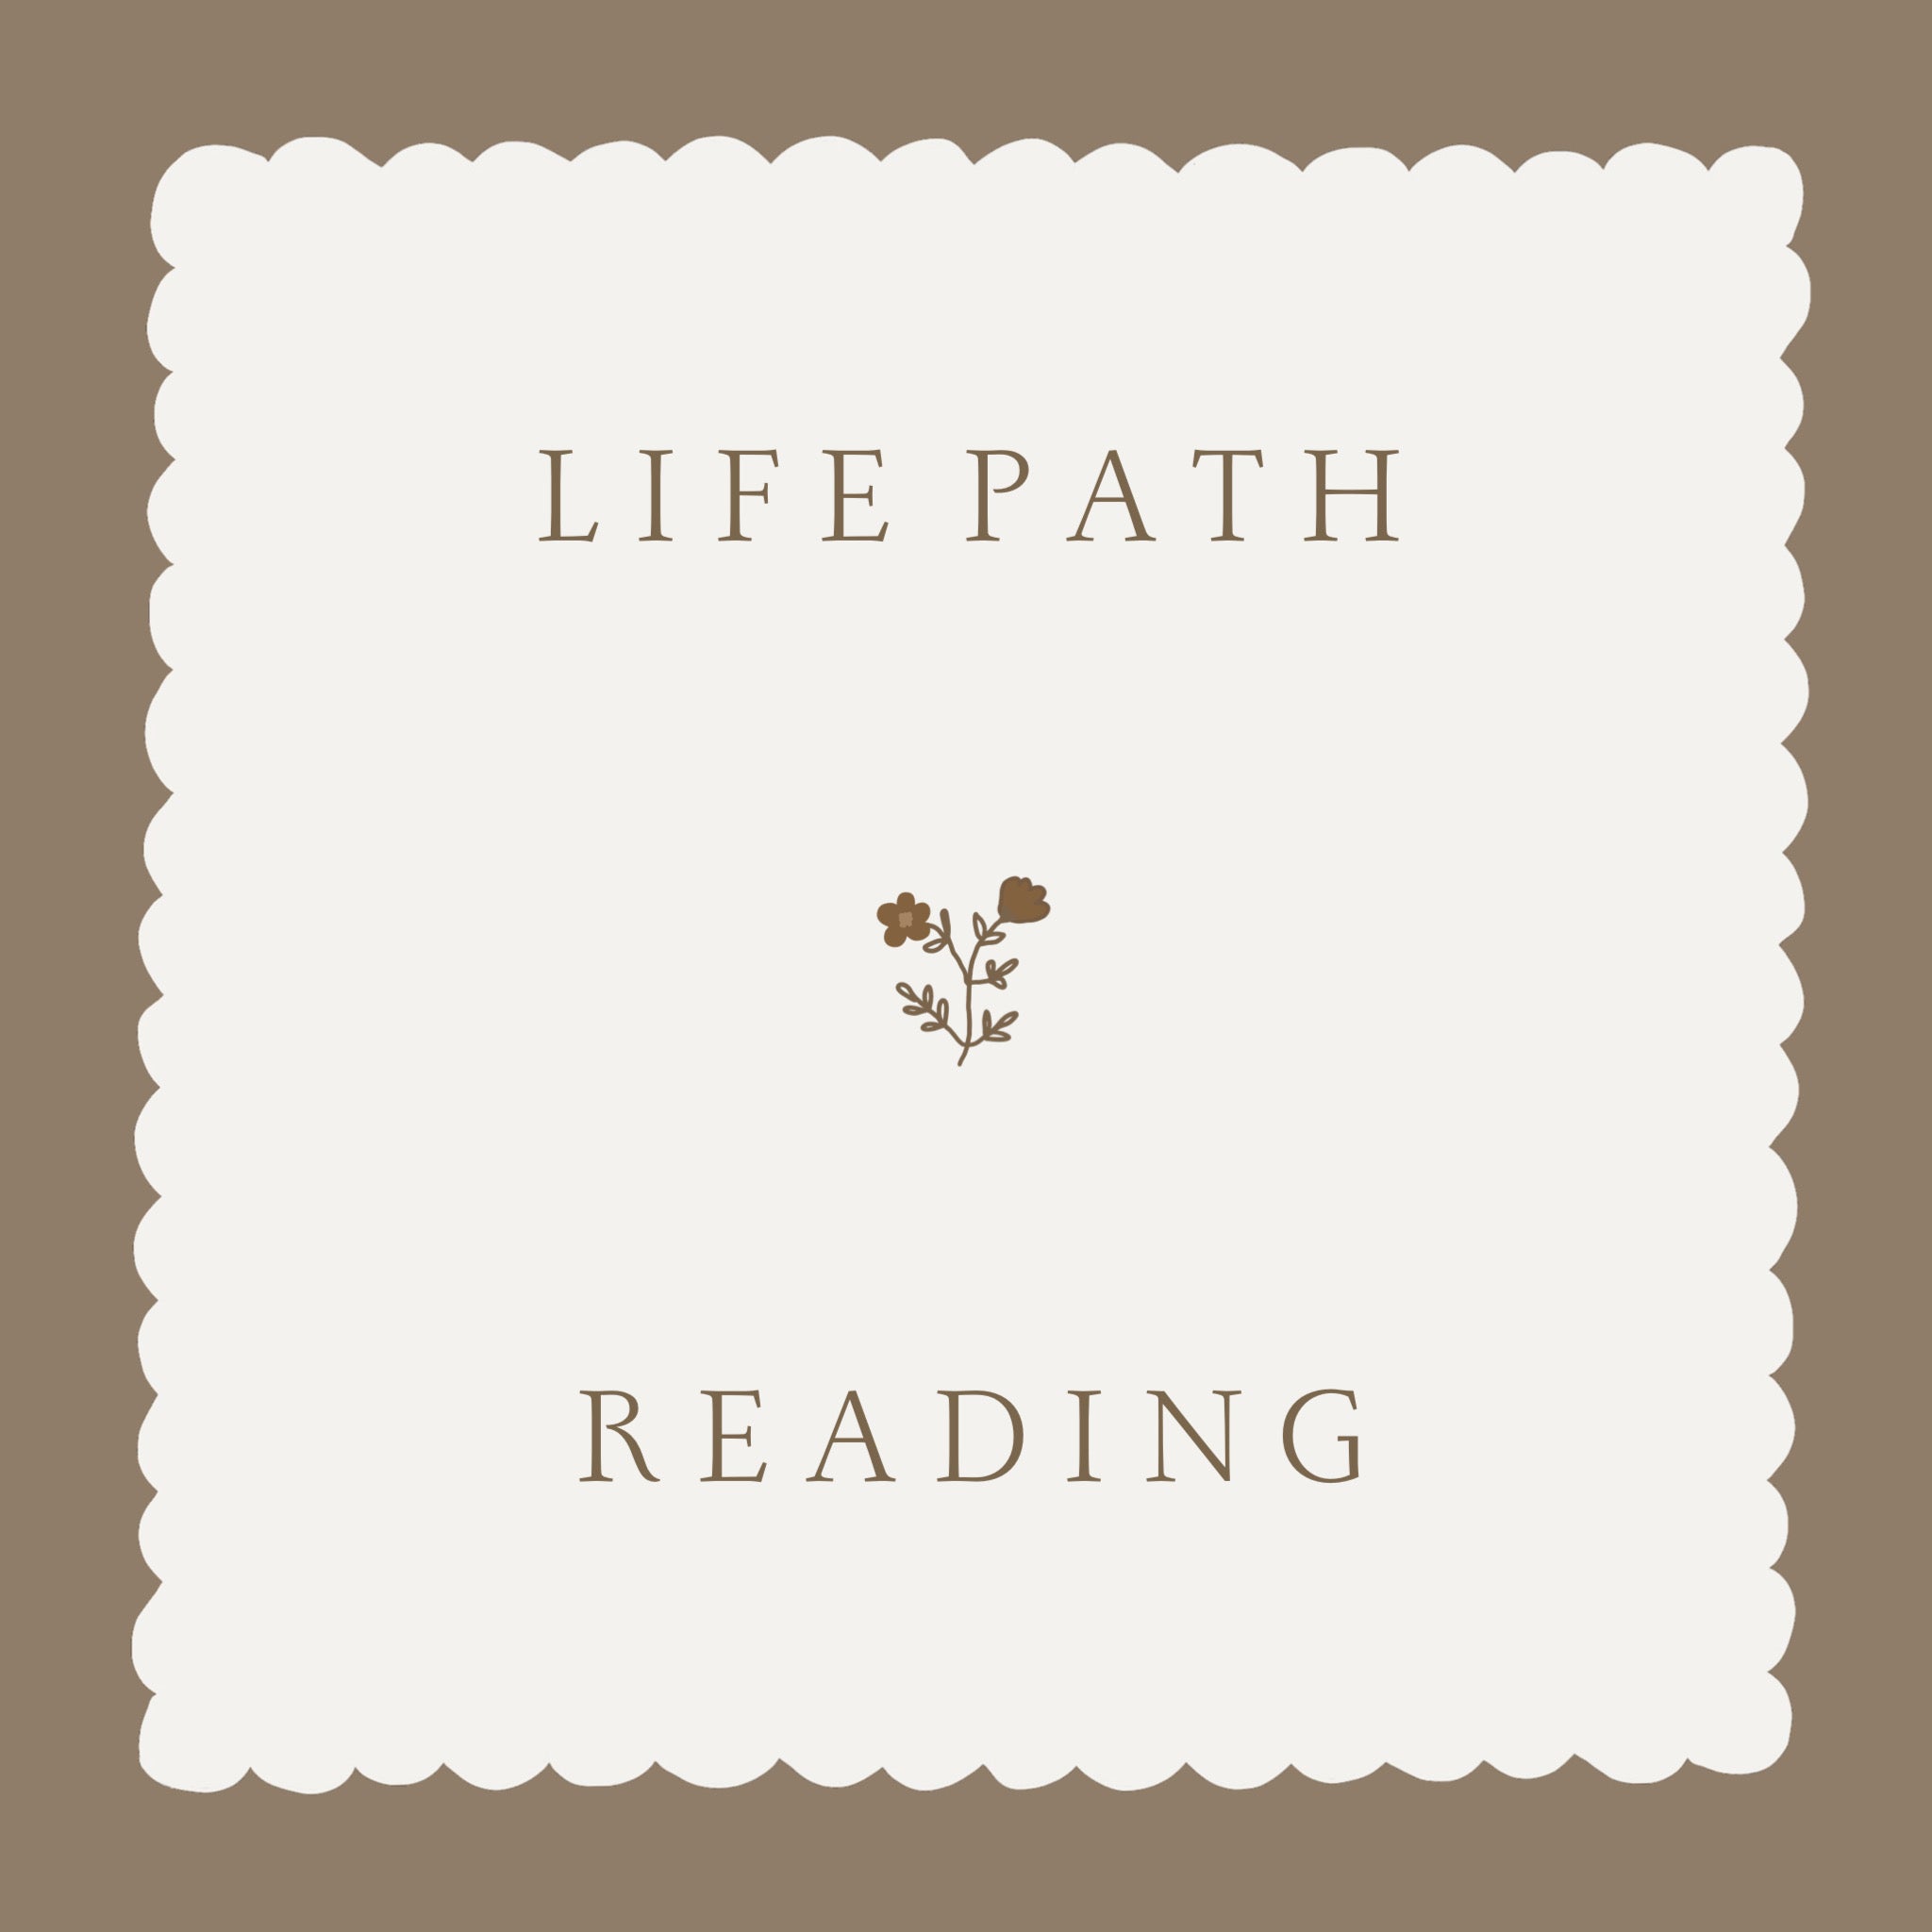 discover your life path reading